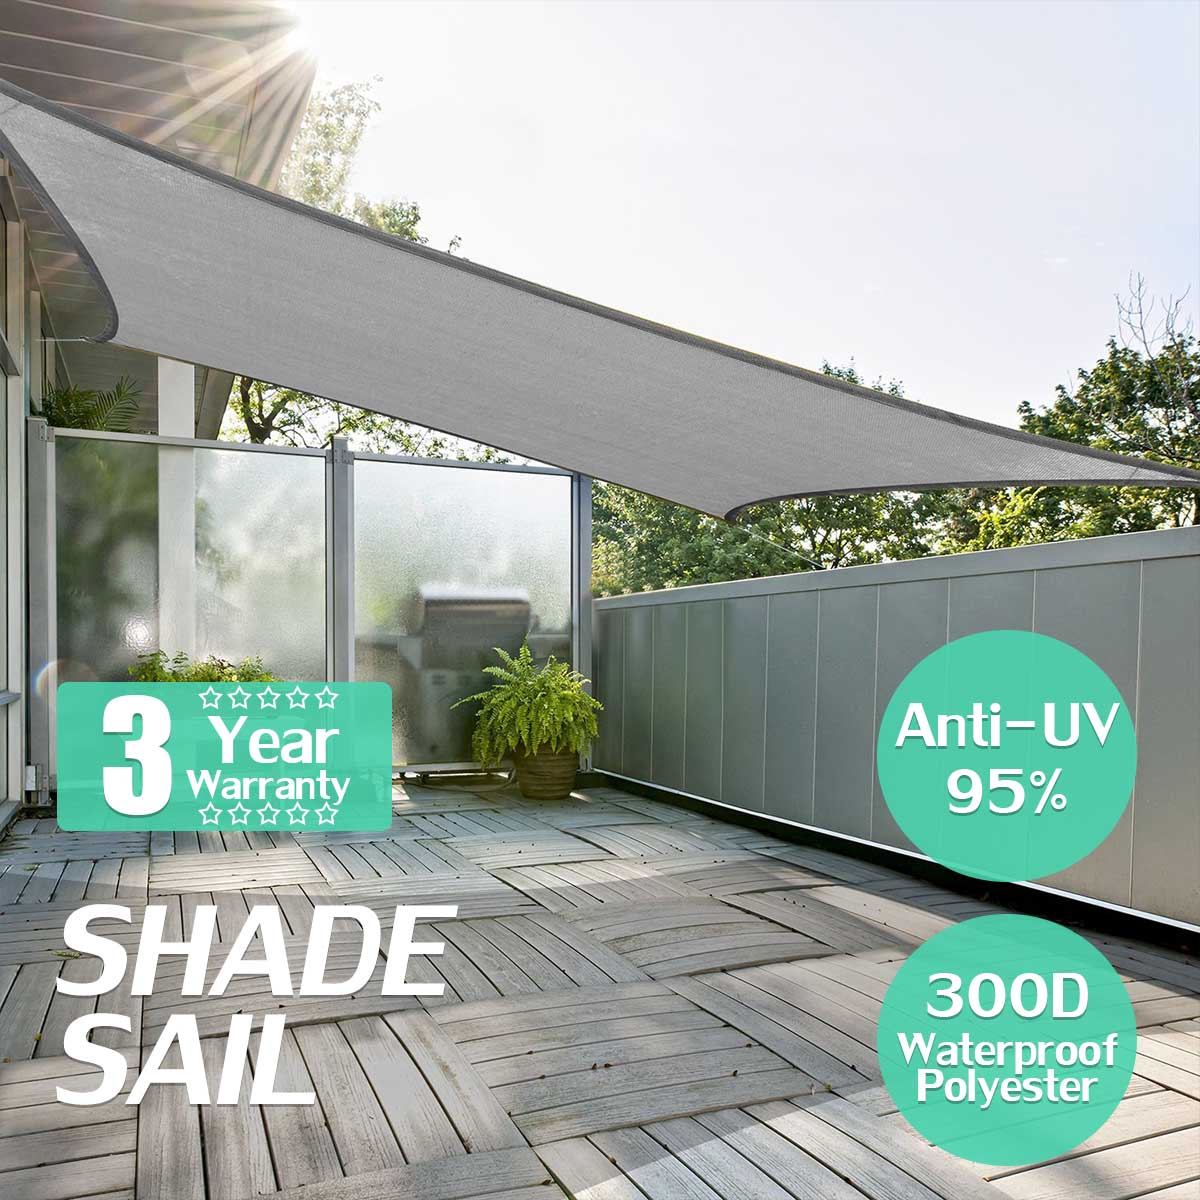 280gsm HDPE Sun Shade Sail Cloth Canopy Awning Shelter Outdoor Square 